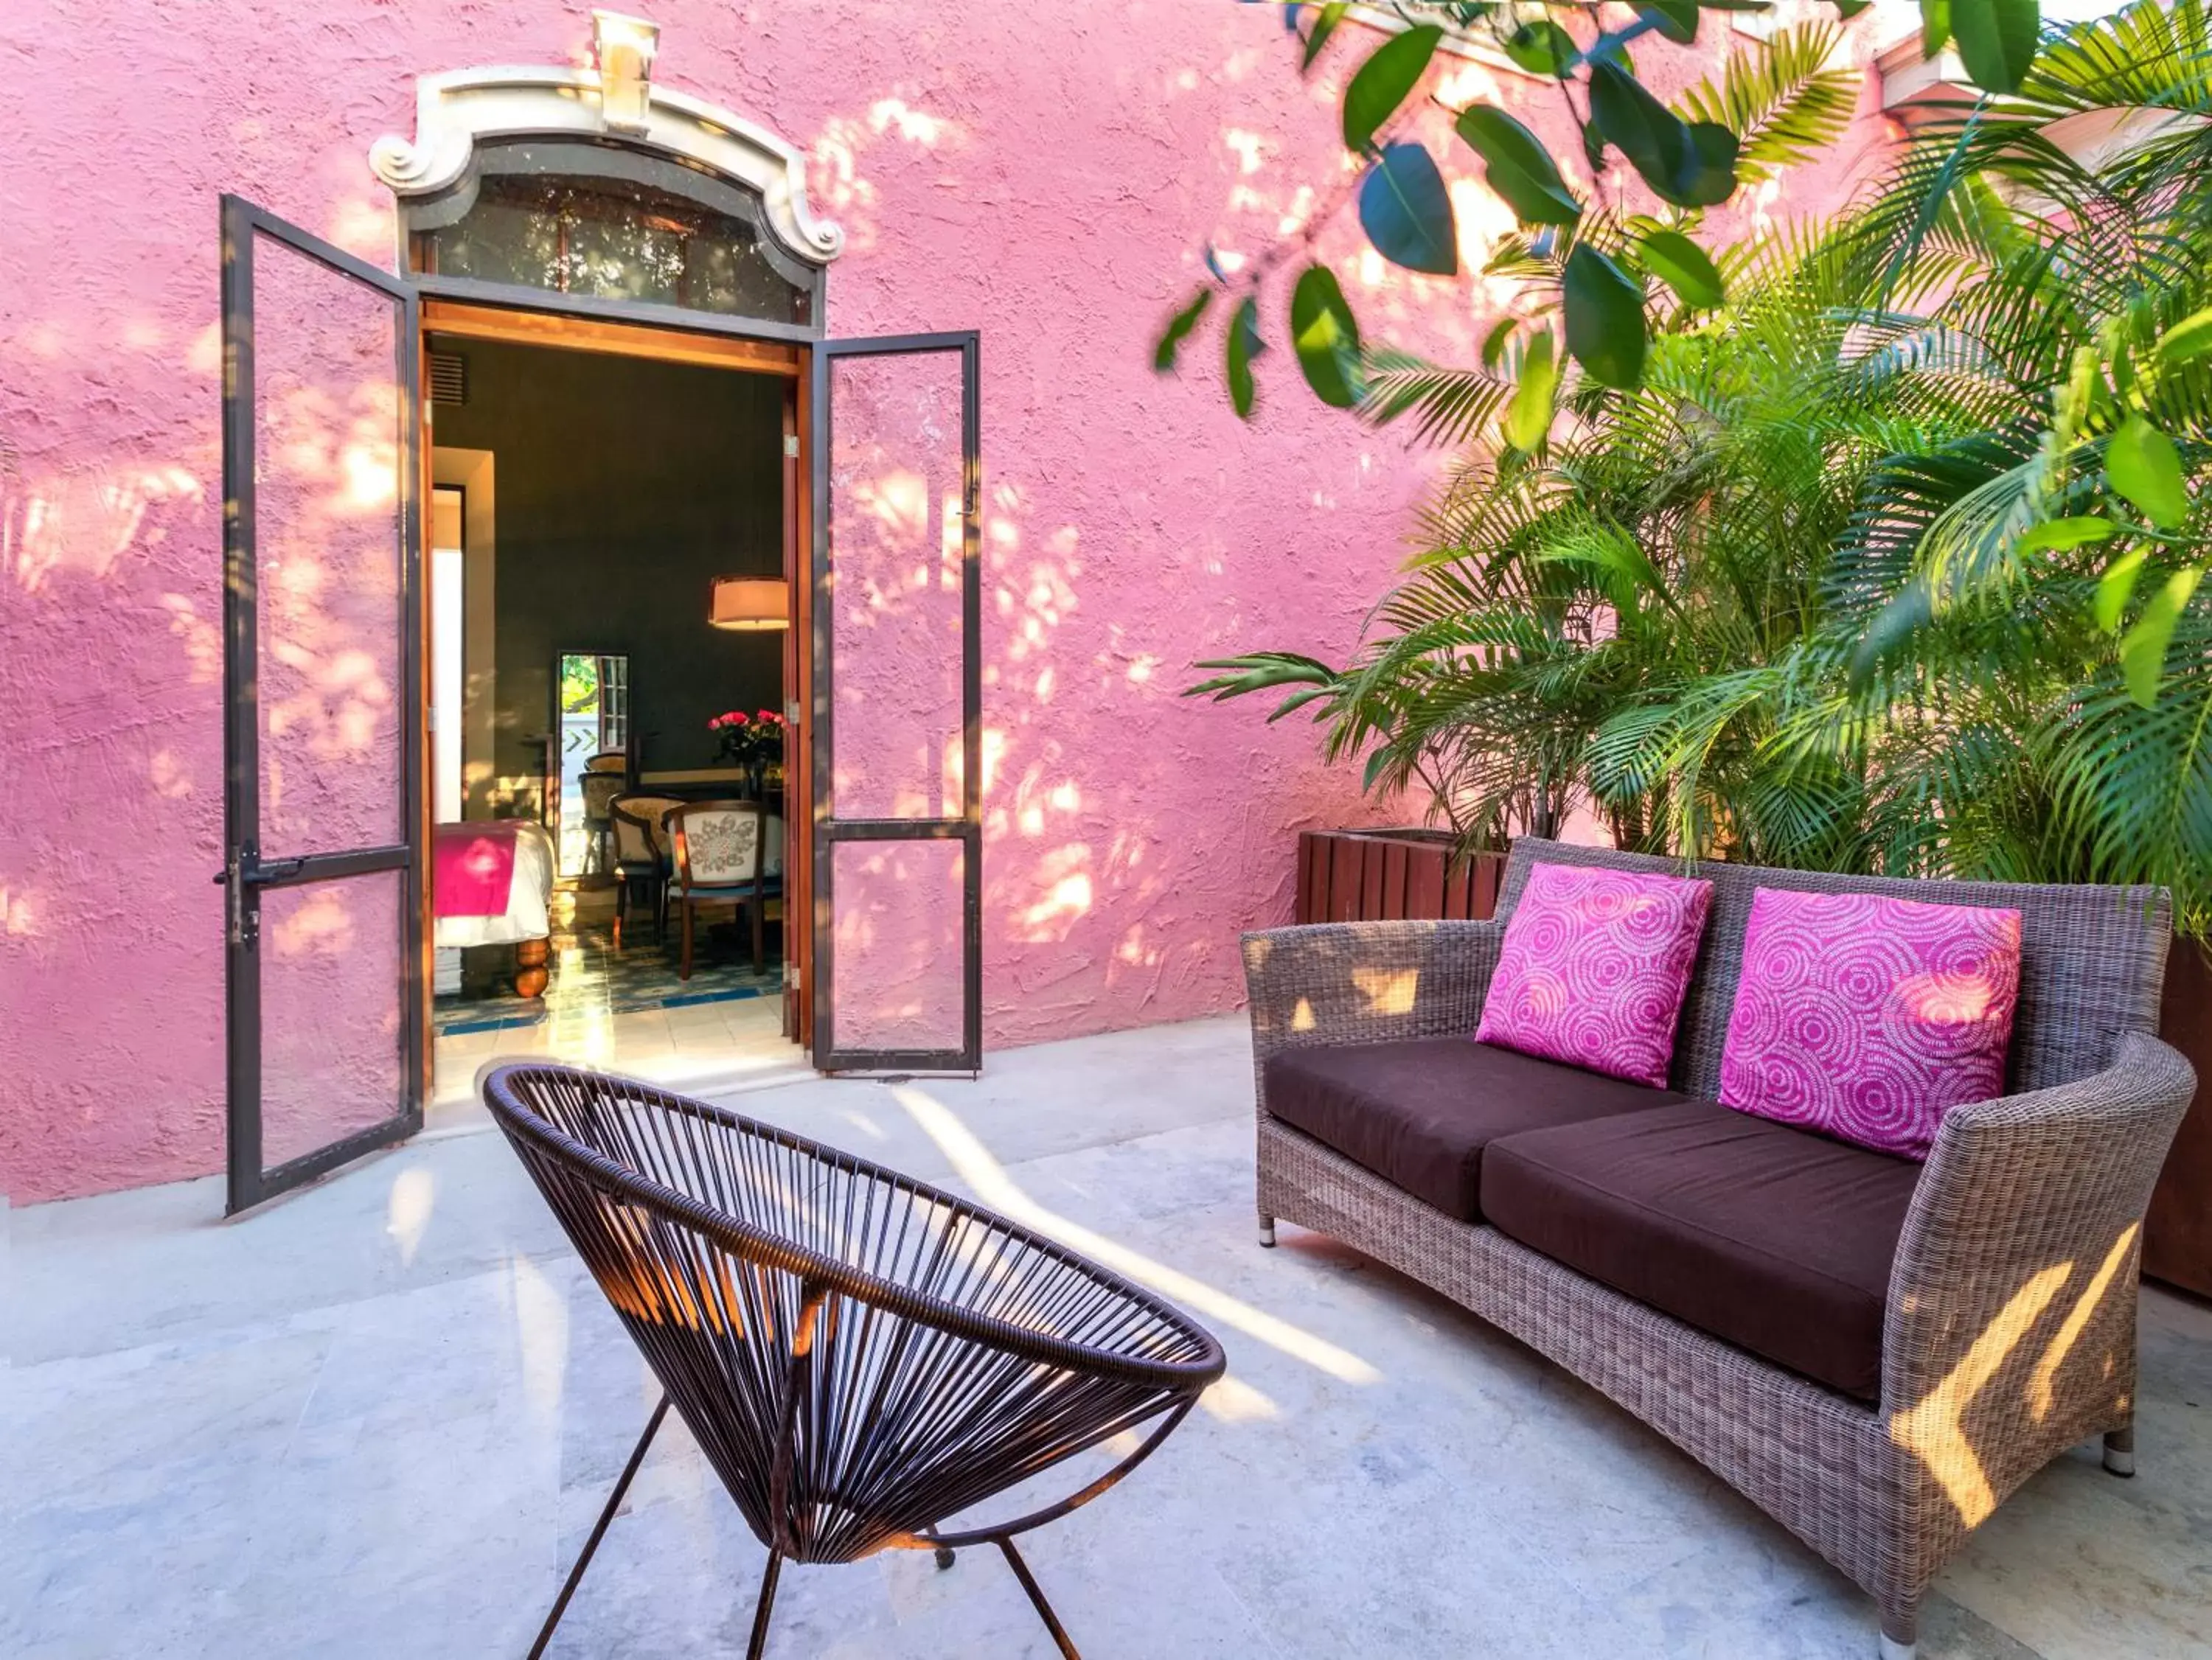 Balcony/Terrace in Rosas & Xocolate Boutique Hotel and Spa Merida, a Member of Design Hotels